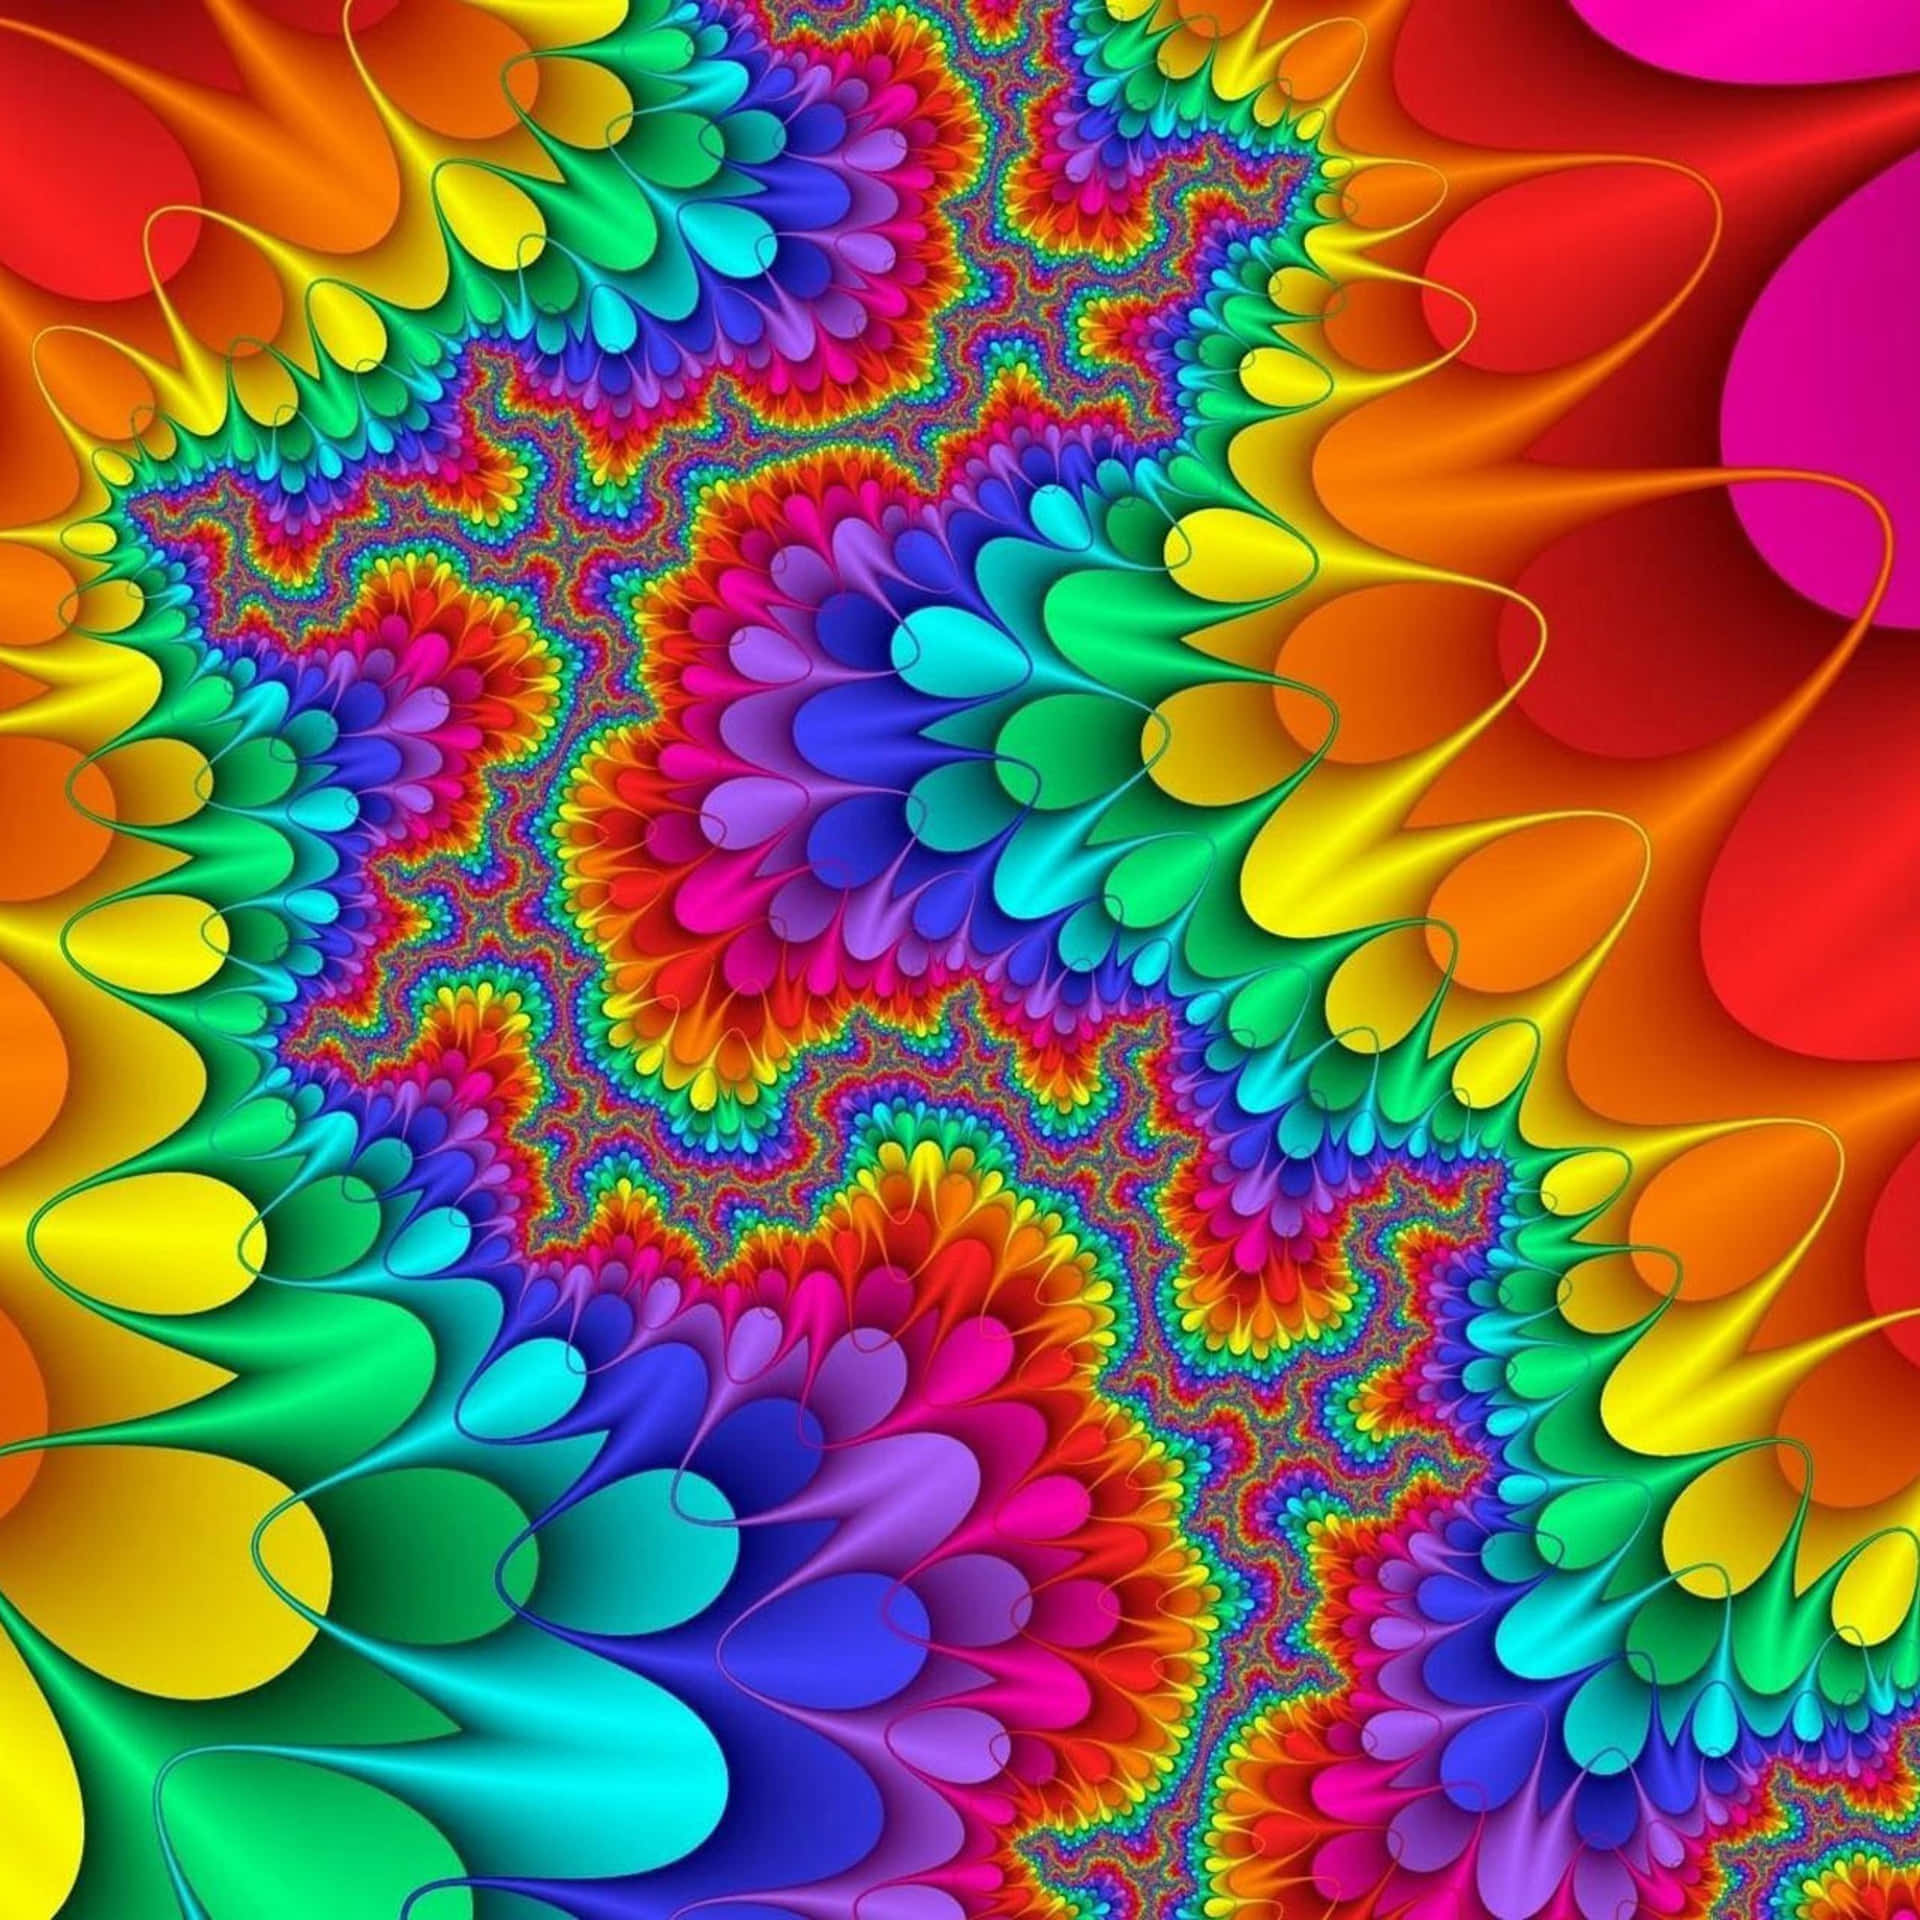 Intricate Colorful Abstract Art Wallpaper